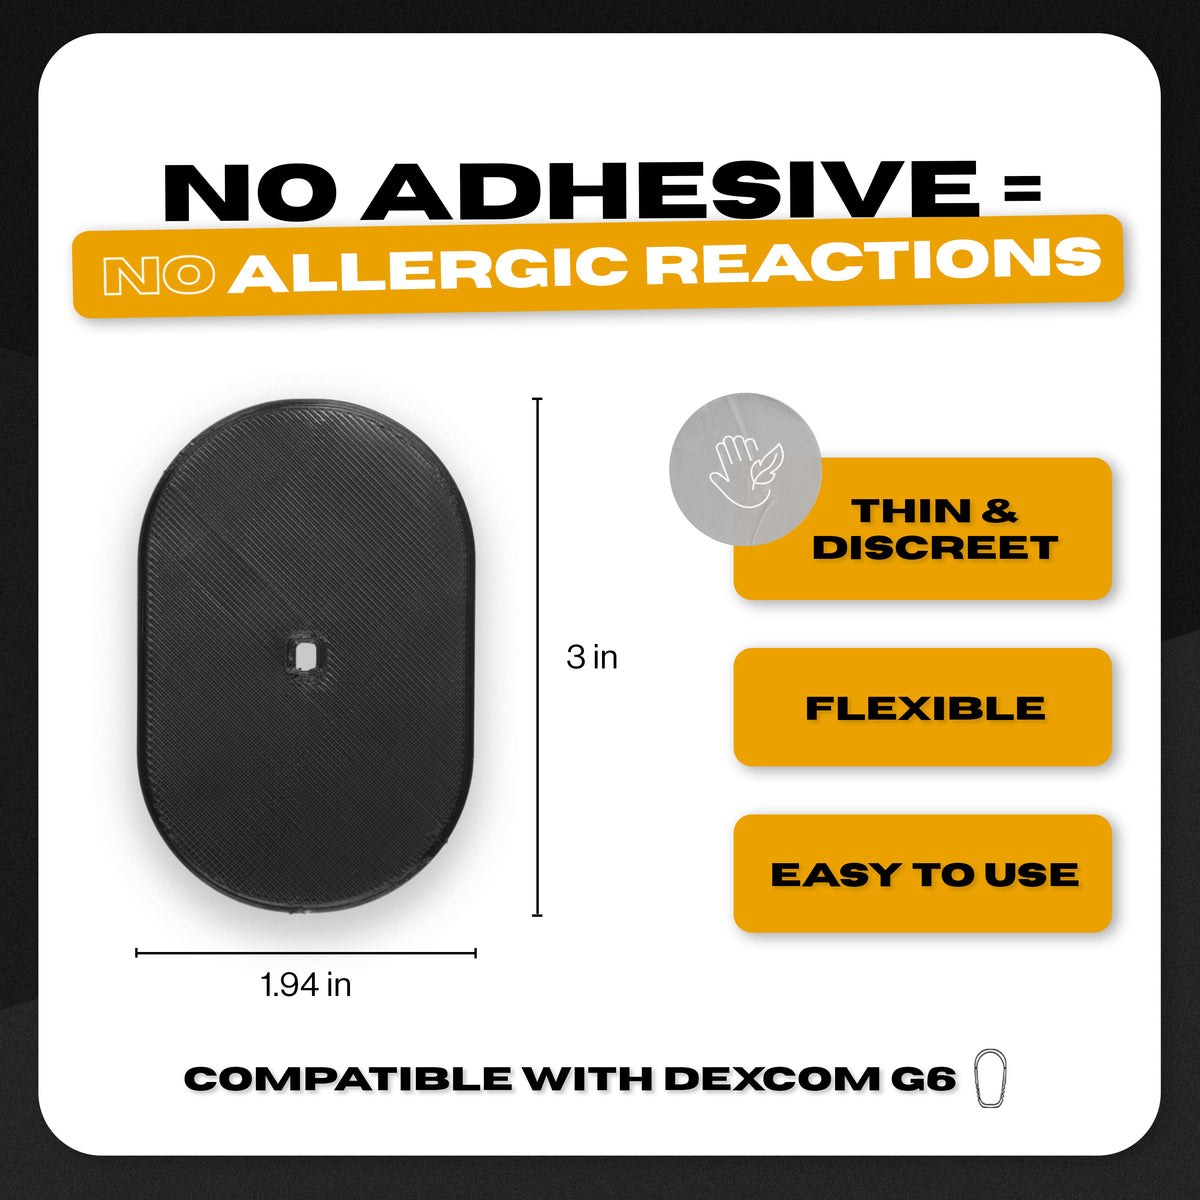 Flexible & Reusable Cover and x10 Patches Compatible with Dexcom